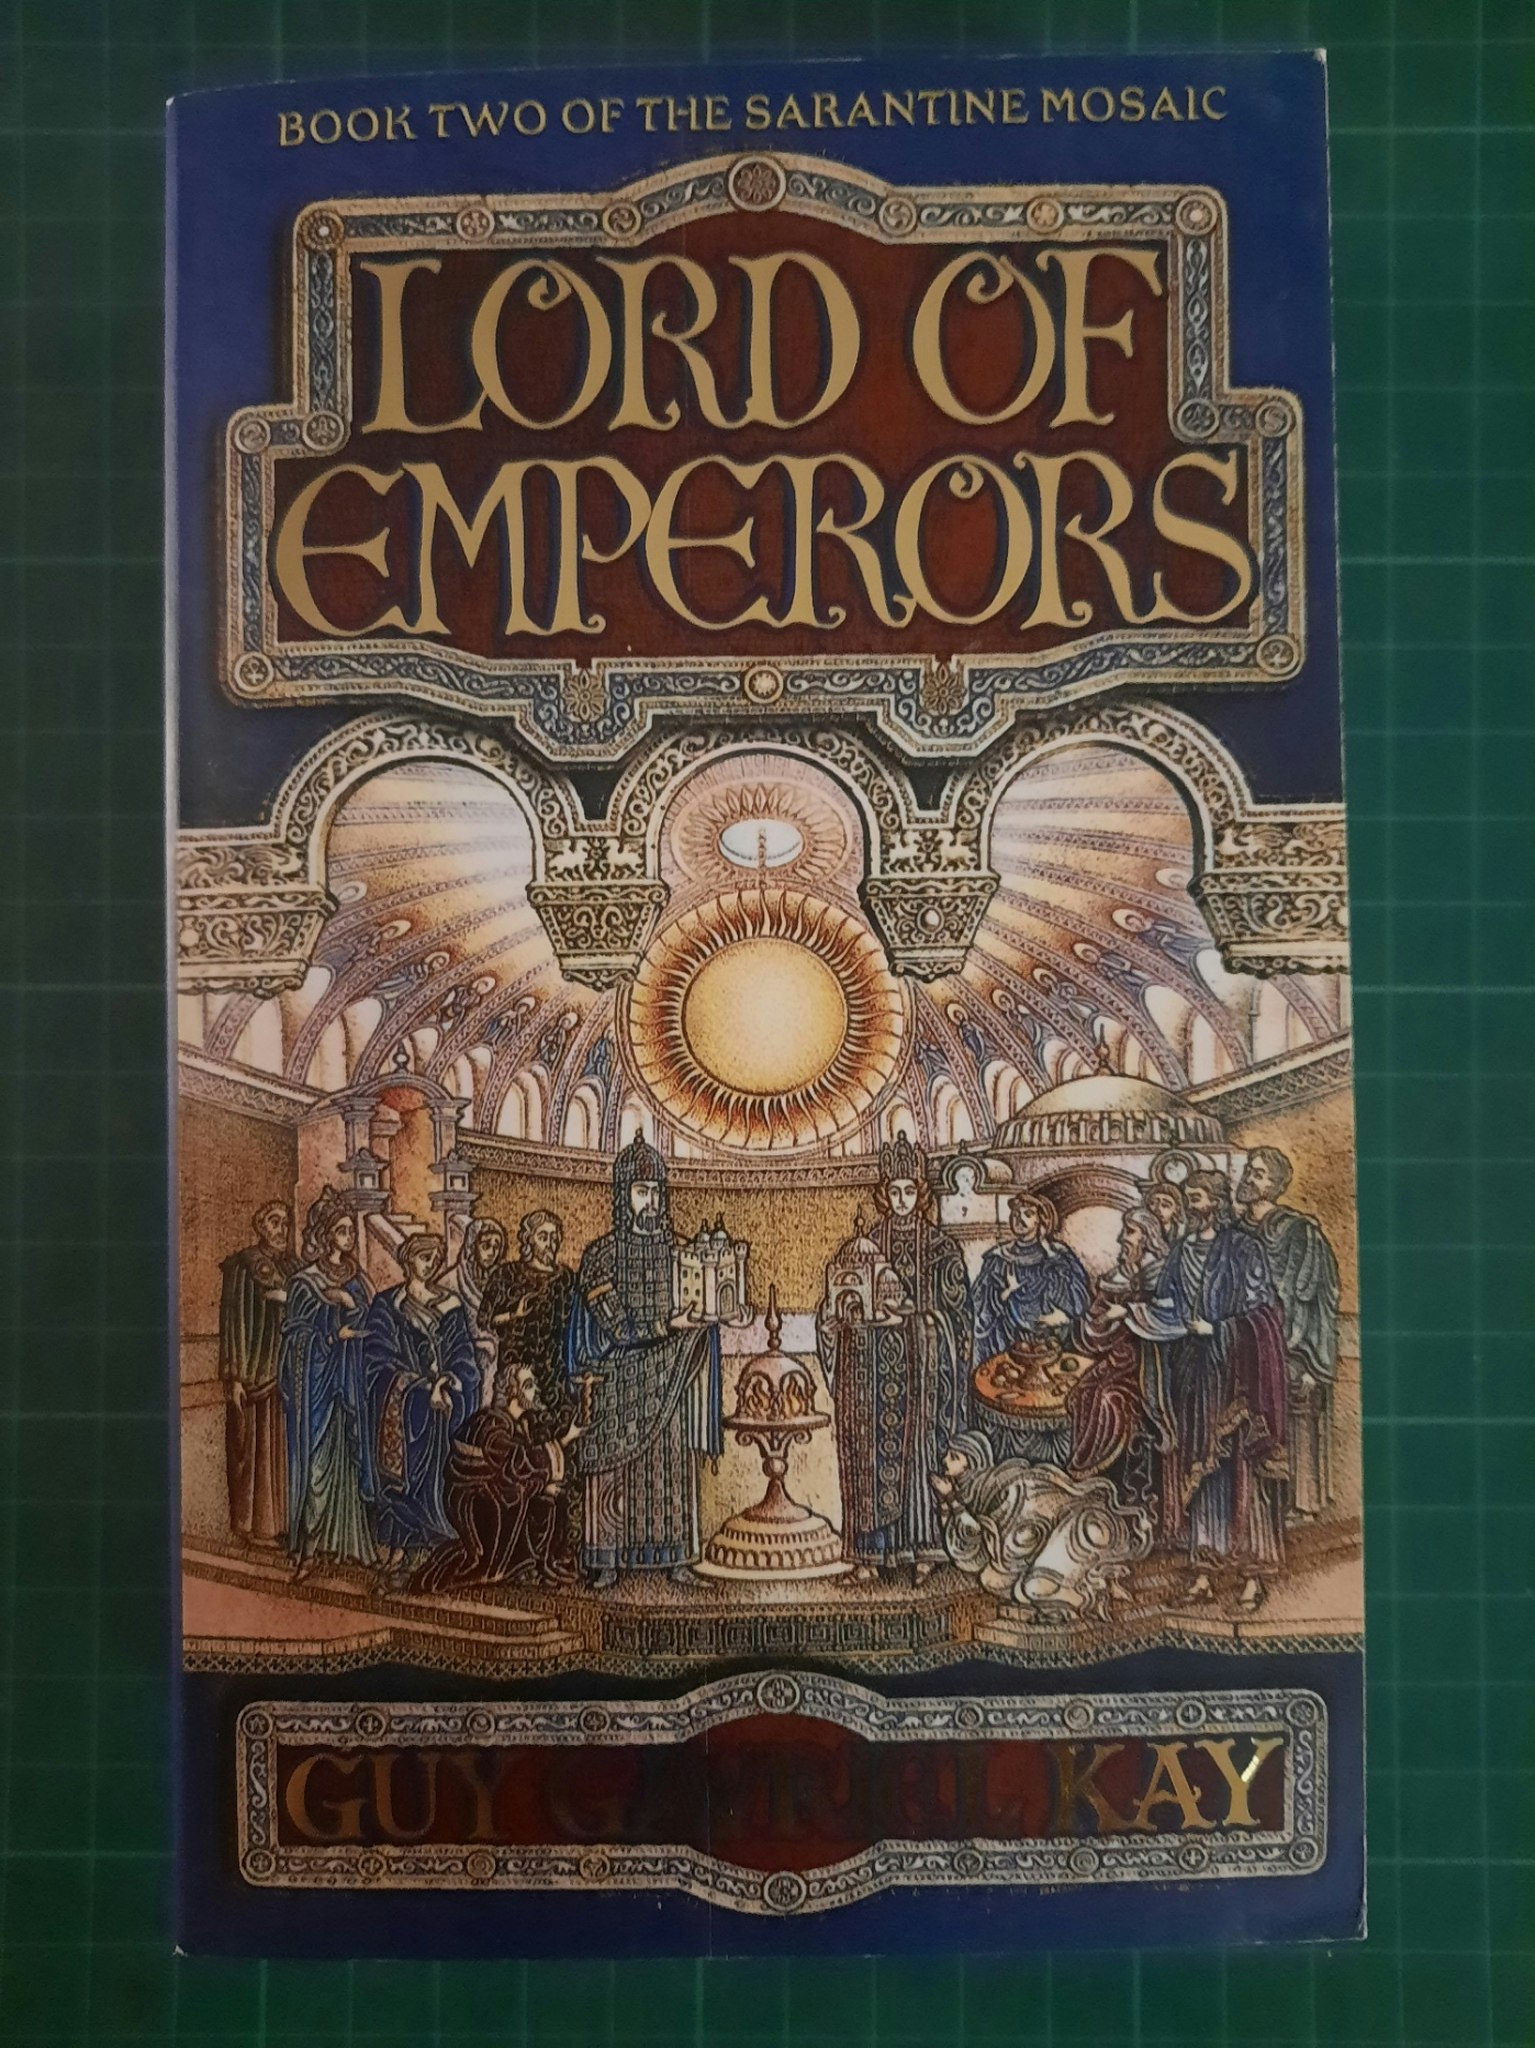 Lord of emperors